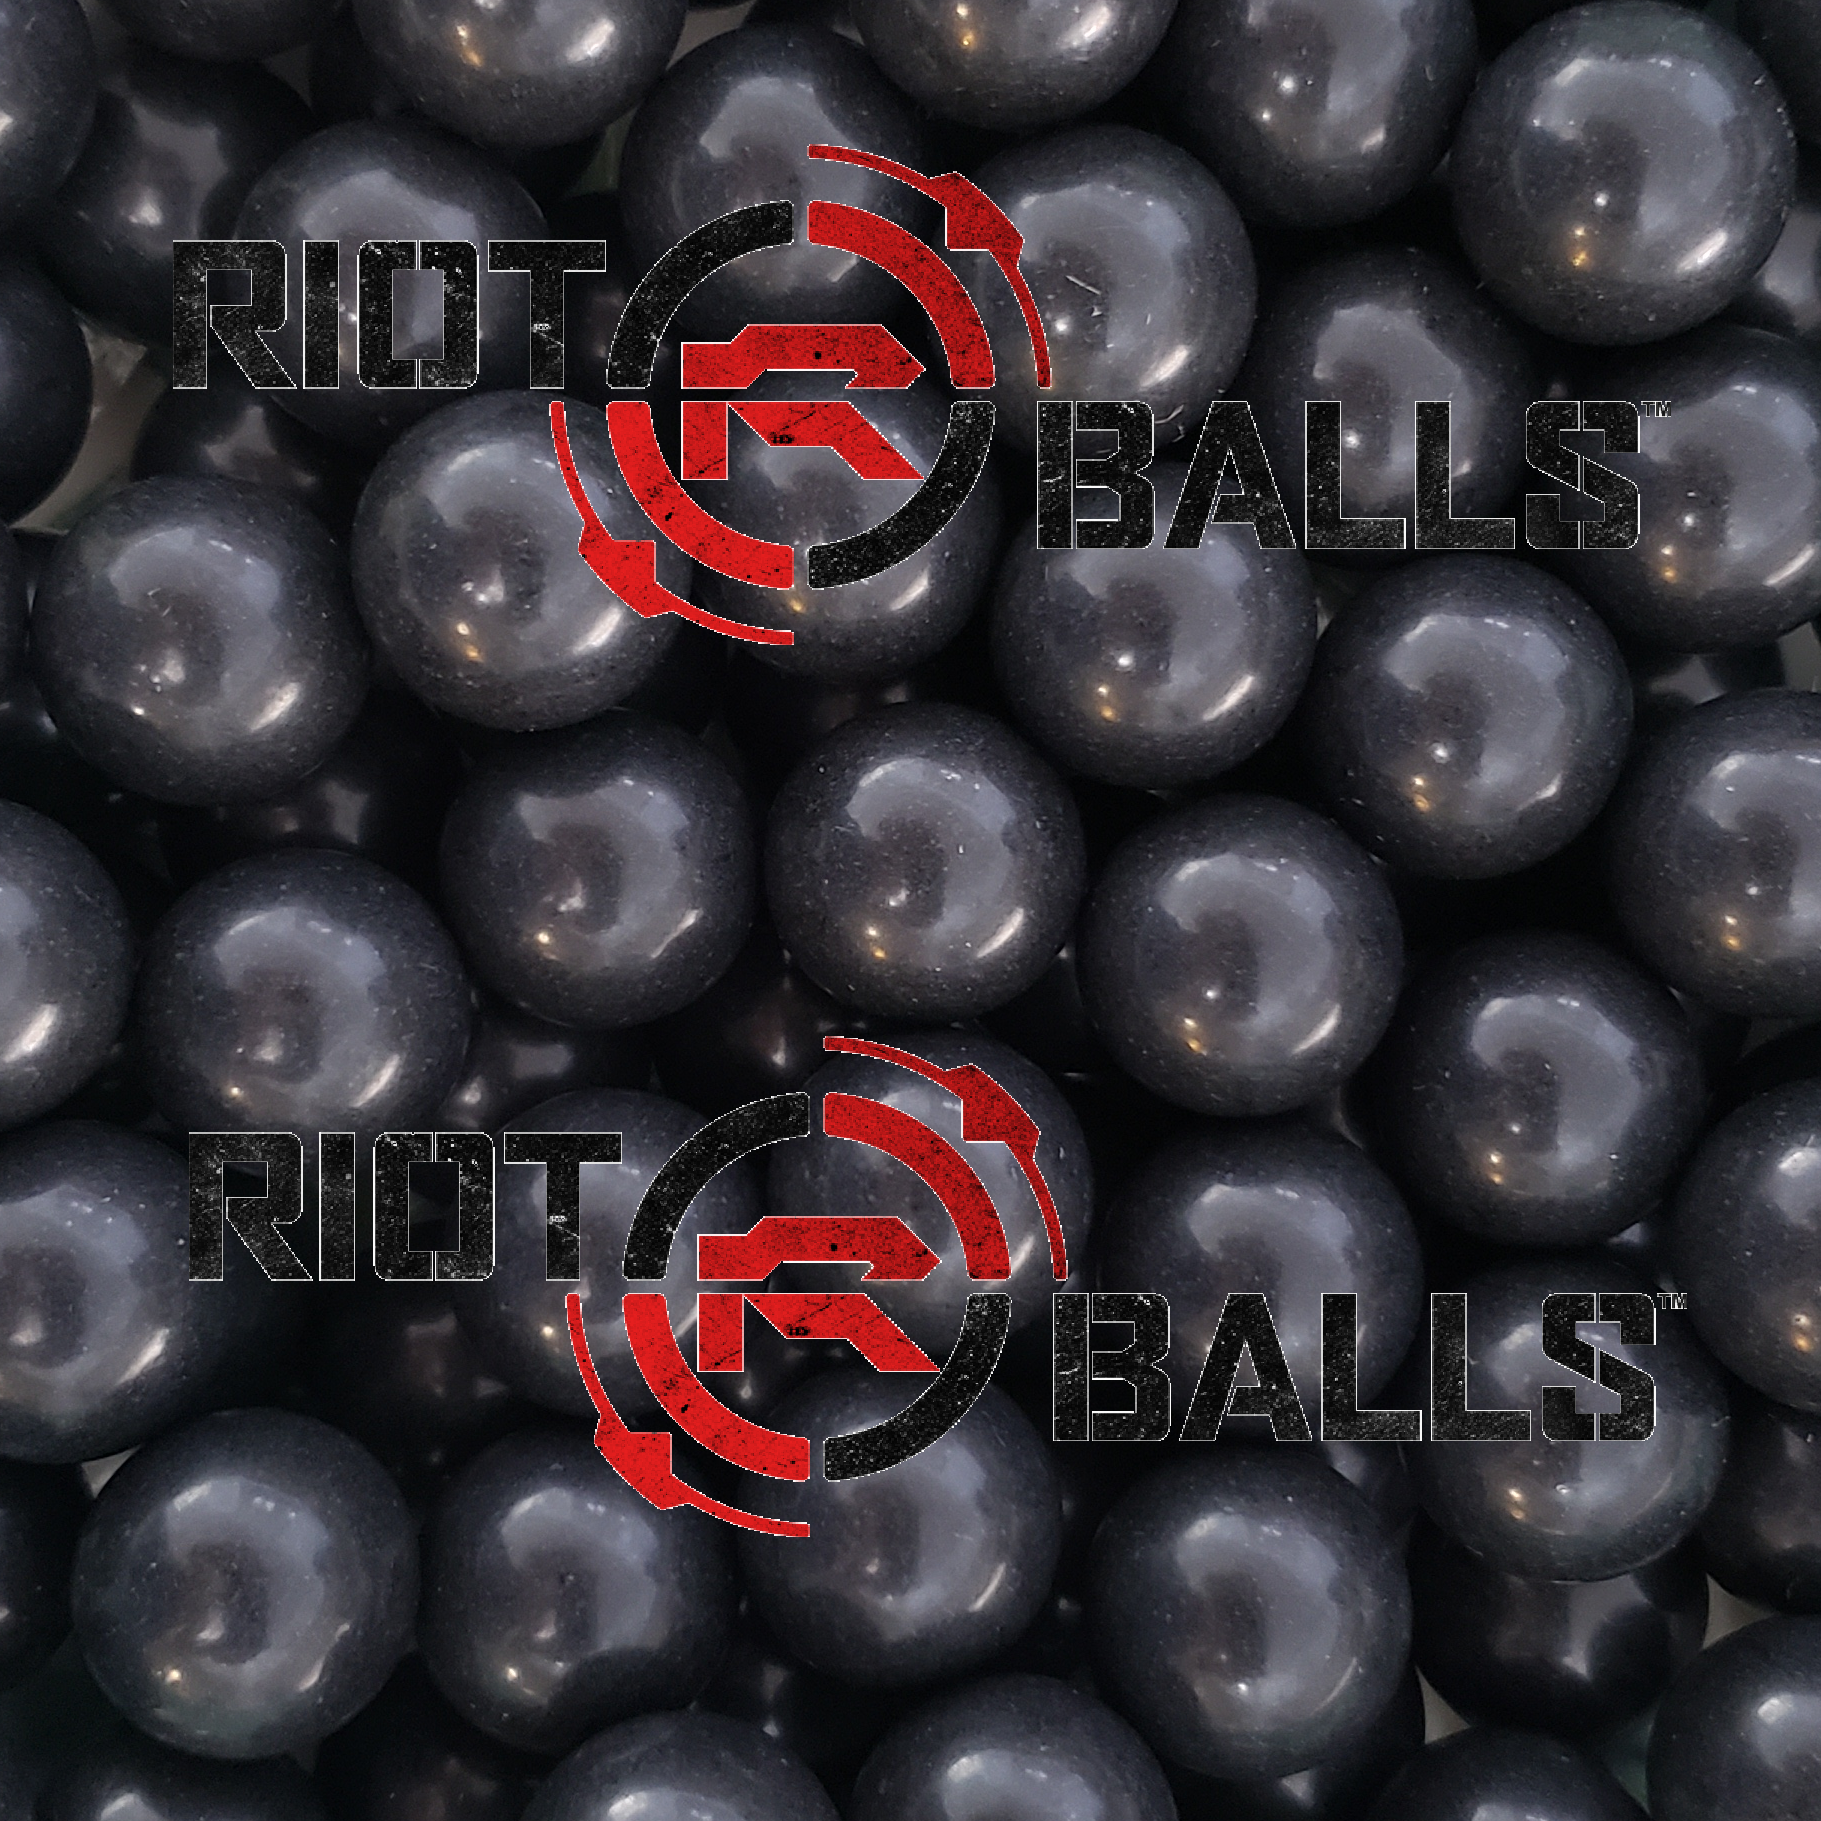 100 X .68 Cal Reusable Black Rubber Paintball Hard Solid Paintballs for  sale online